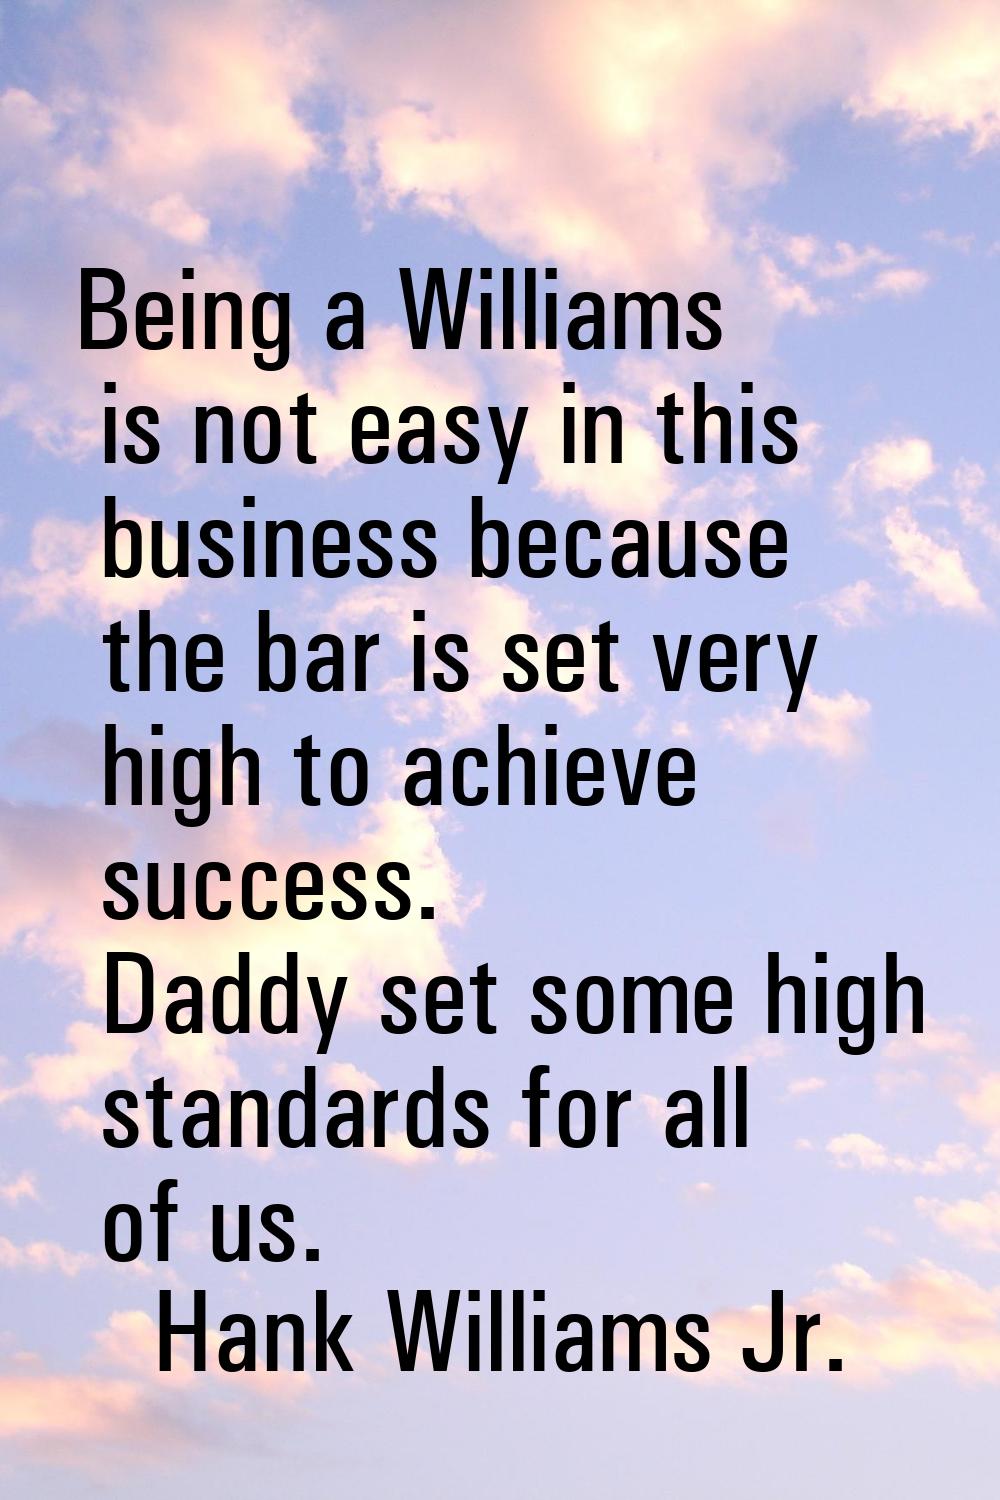 Being a Williams is not easy in this business because the bar is set very high to achieve success. 